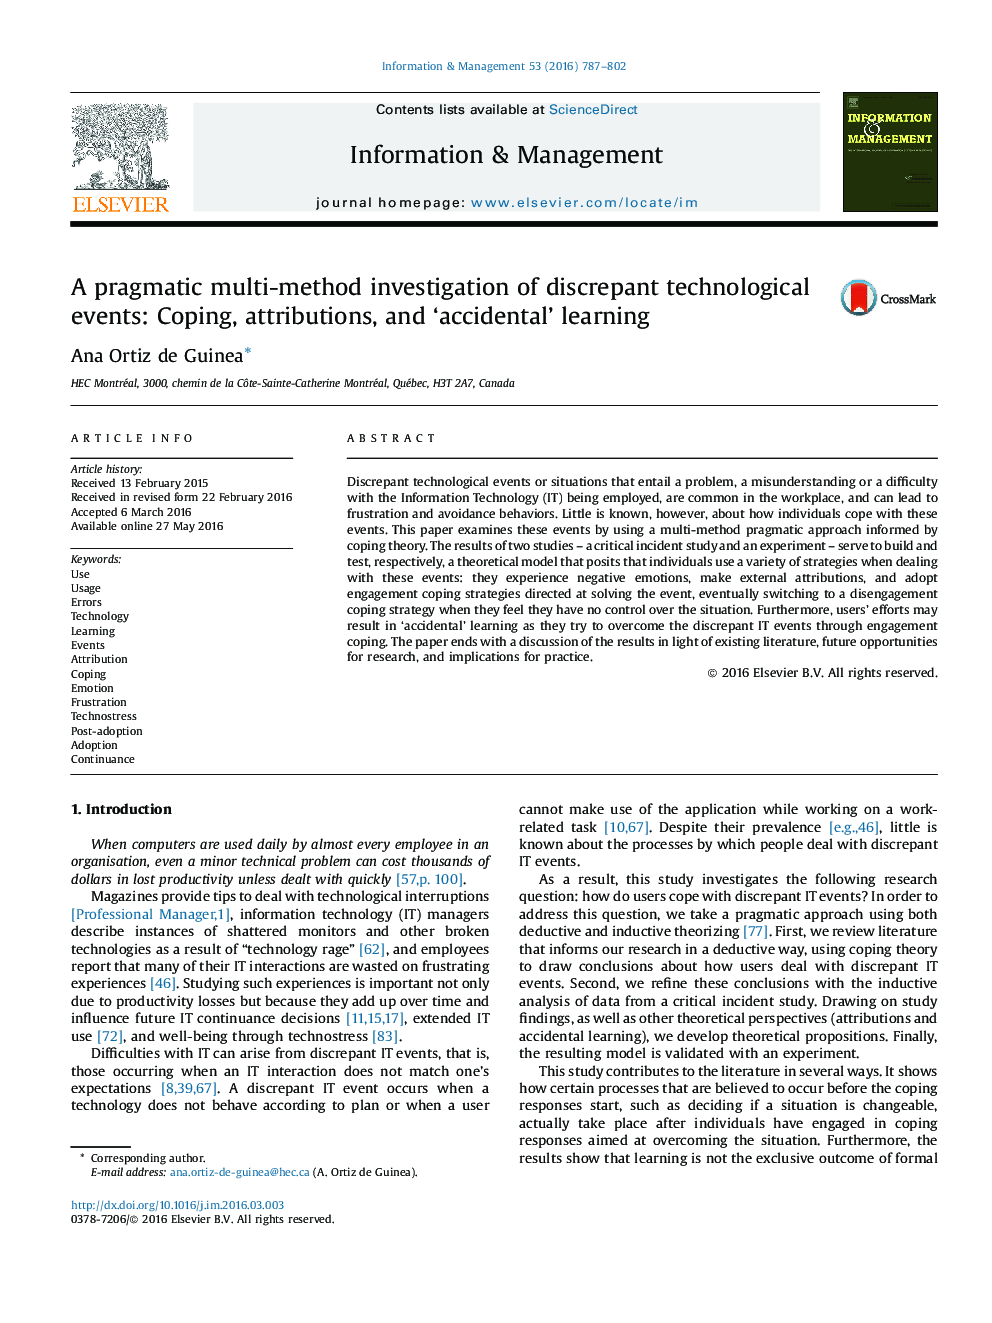 A pragmatic multi-method investigation of discrepant technological events: Coping, attributions, and ‘accidental’ learning